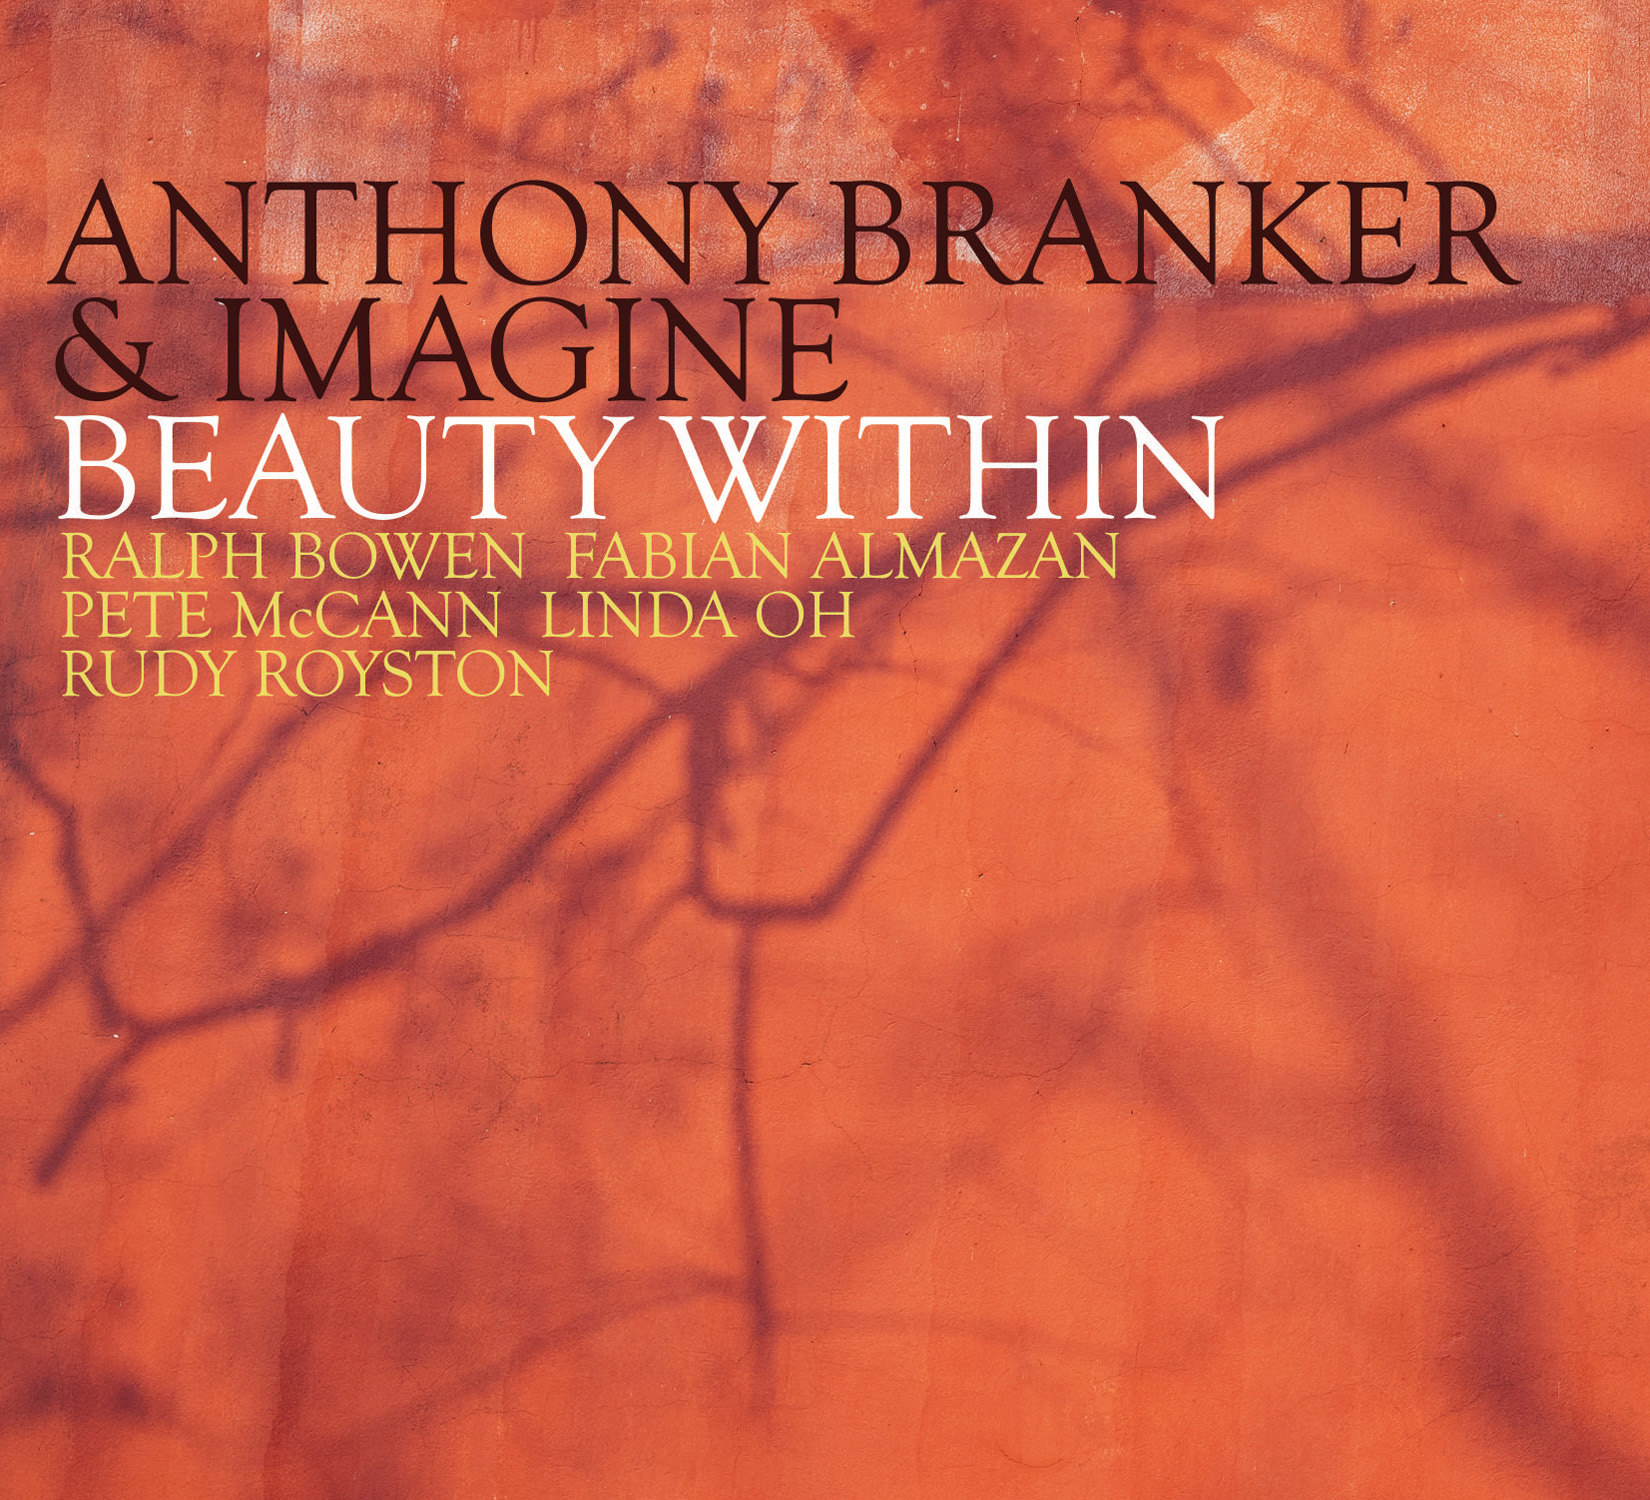 ANTHONY BRANKER - Beauty Within cover 